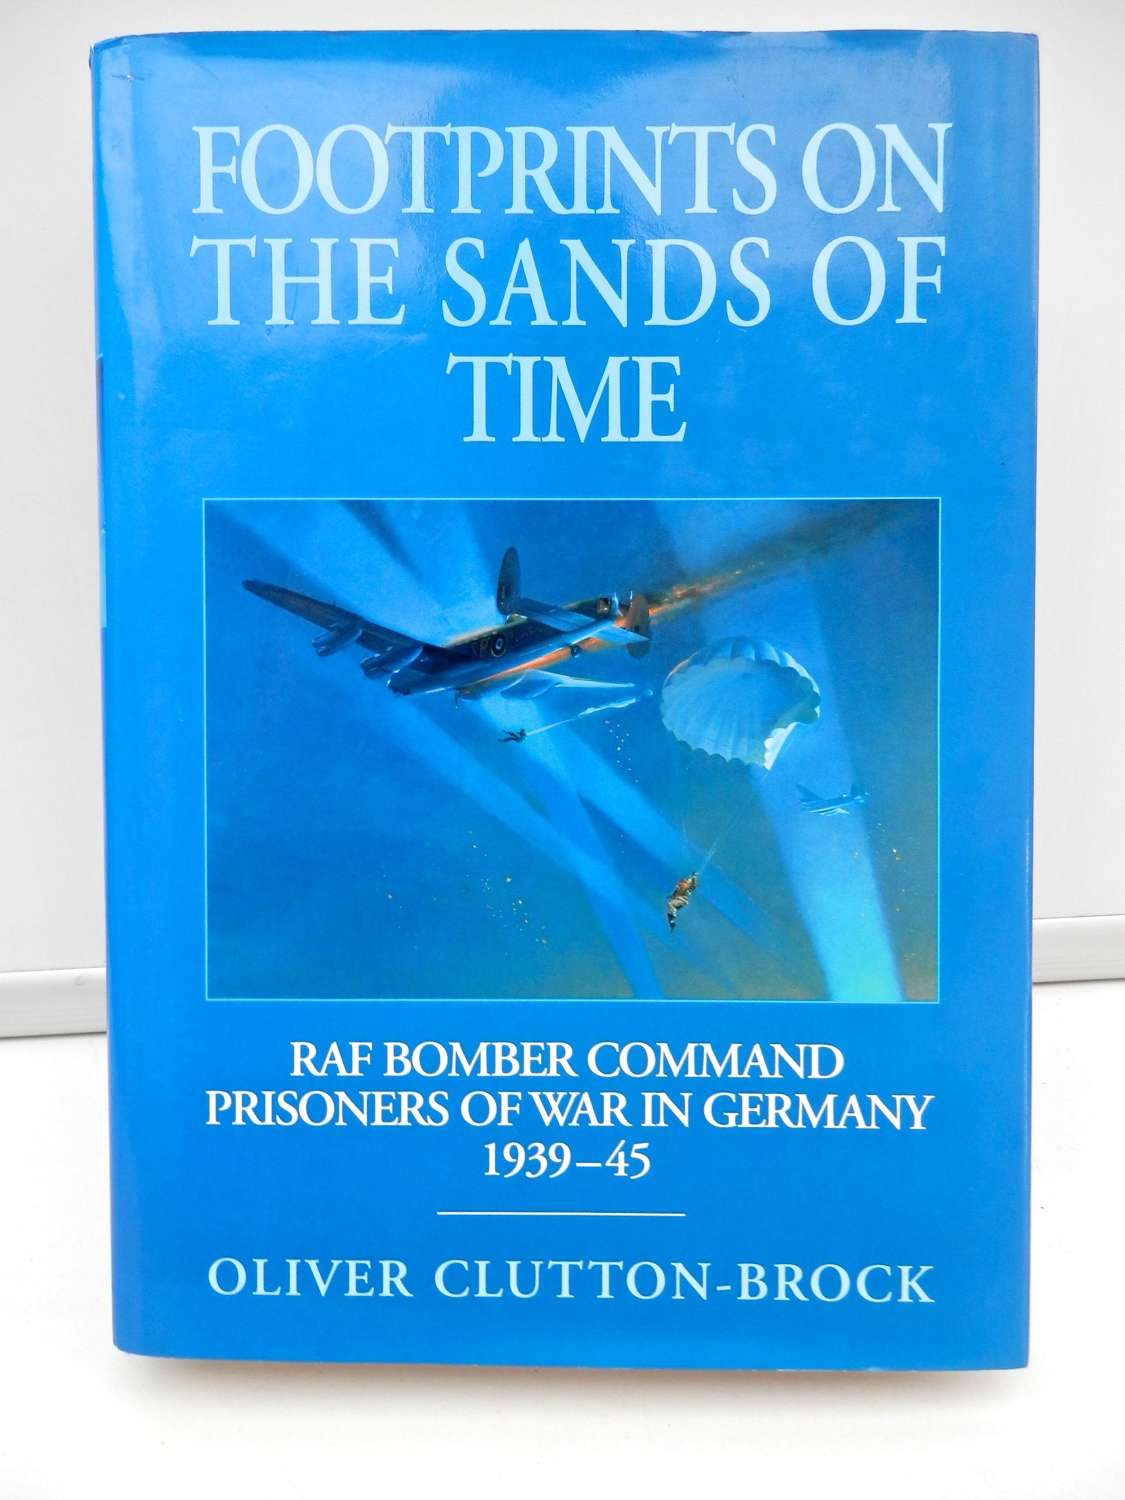 RAF footprints on the sands of time, pow book